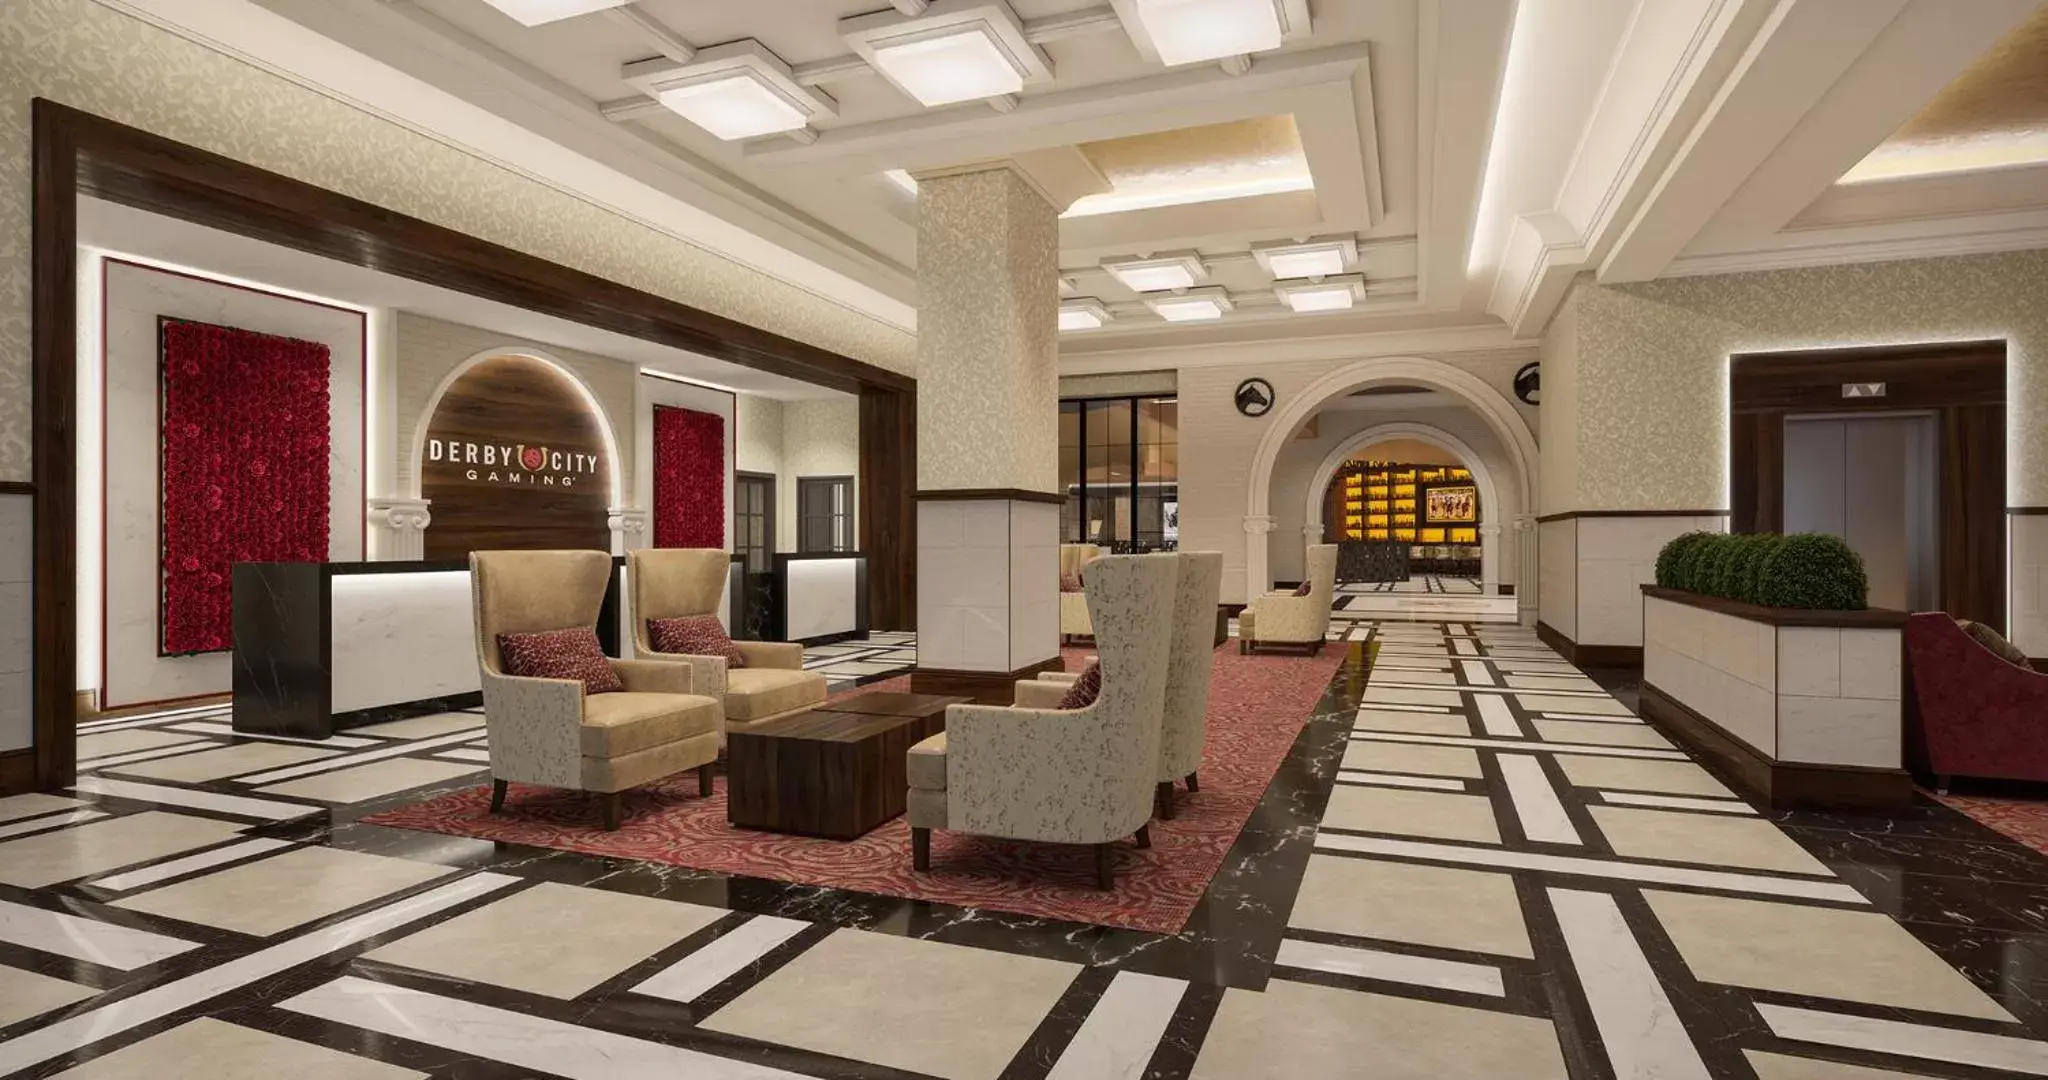 Lobby or reception, Lobby/Reception in Derby City Gaming & Hotel - A Churchill Downs Property